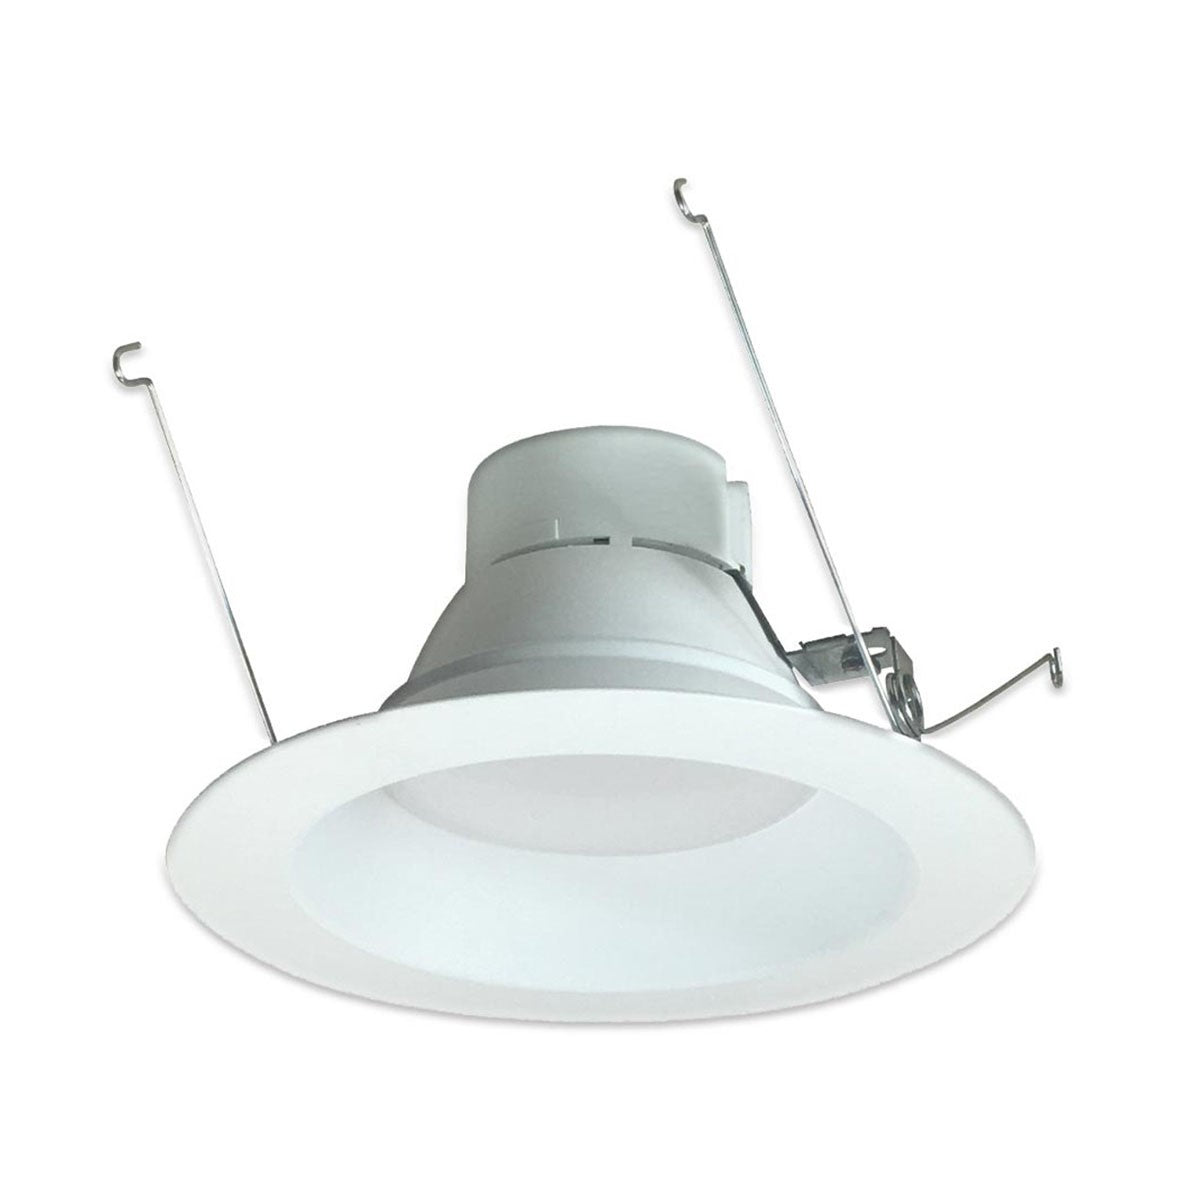 Onyx Recessed LED Can Light, 6 Inch, 15 Watt, 1100 Lumens, Tunable White, 2700K to 5000K, Reflector Trim